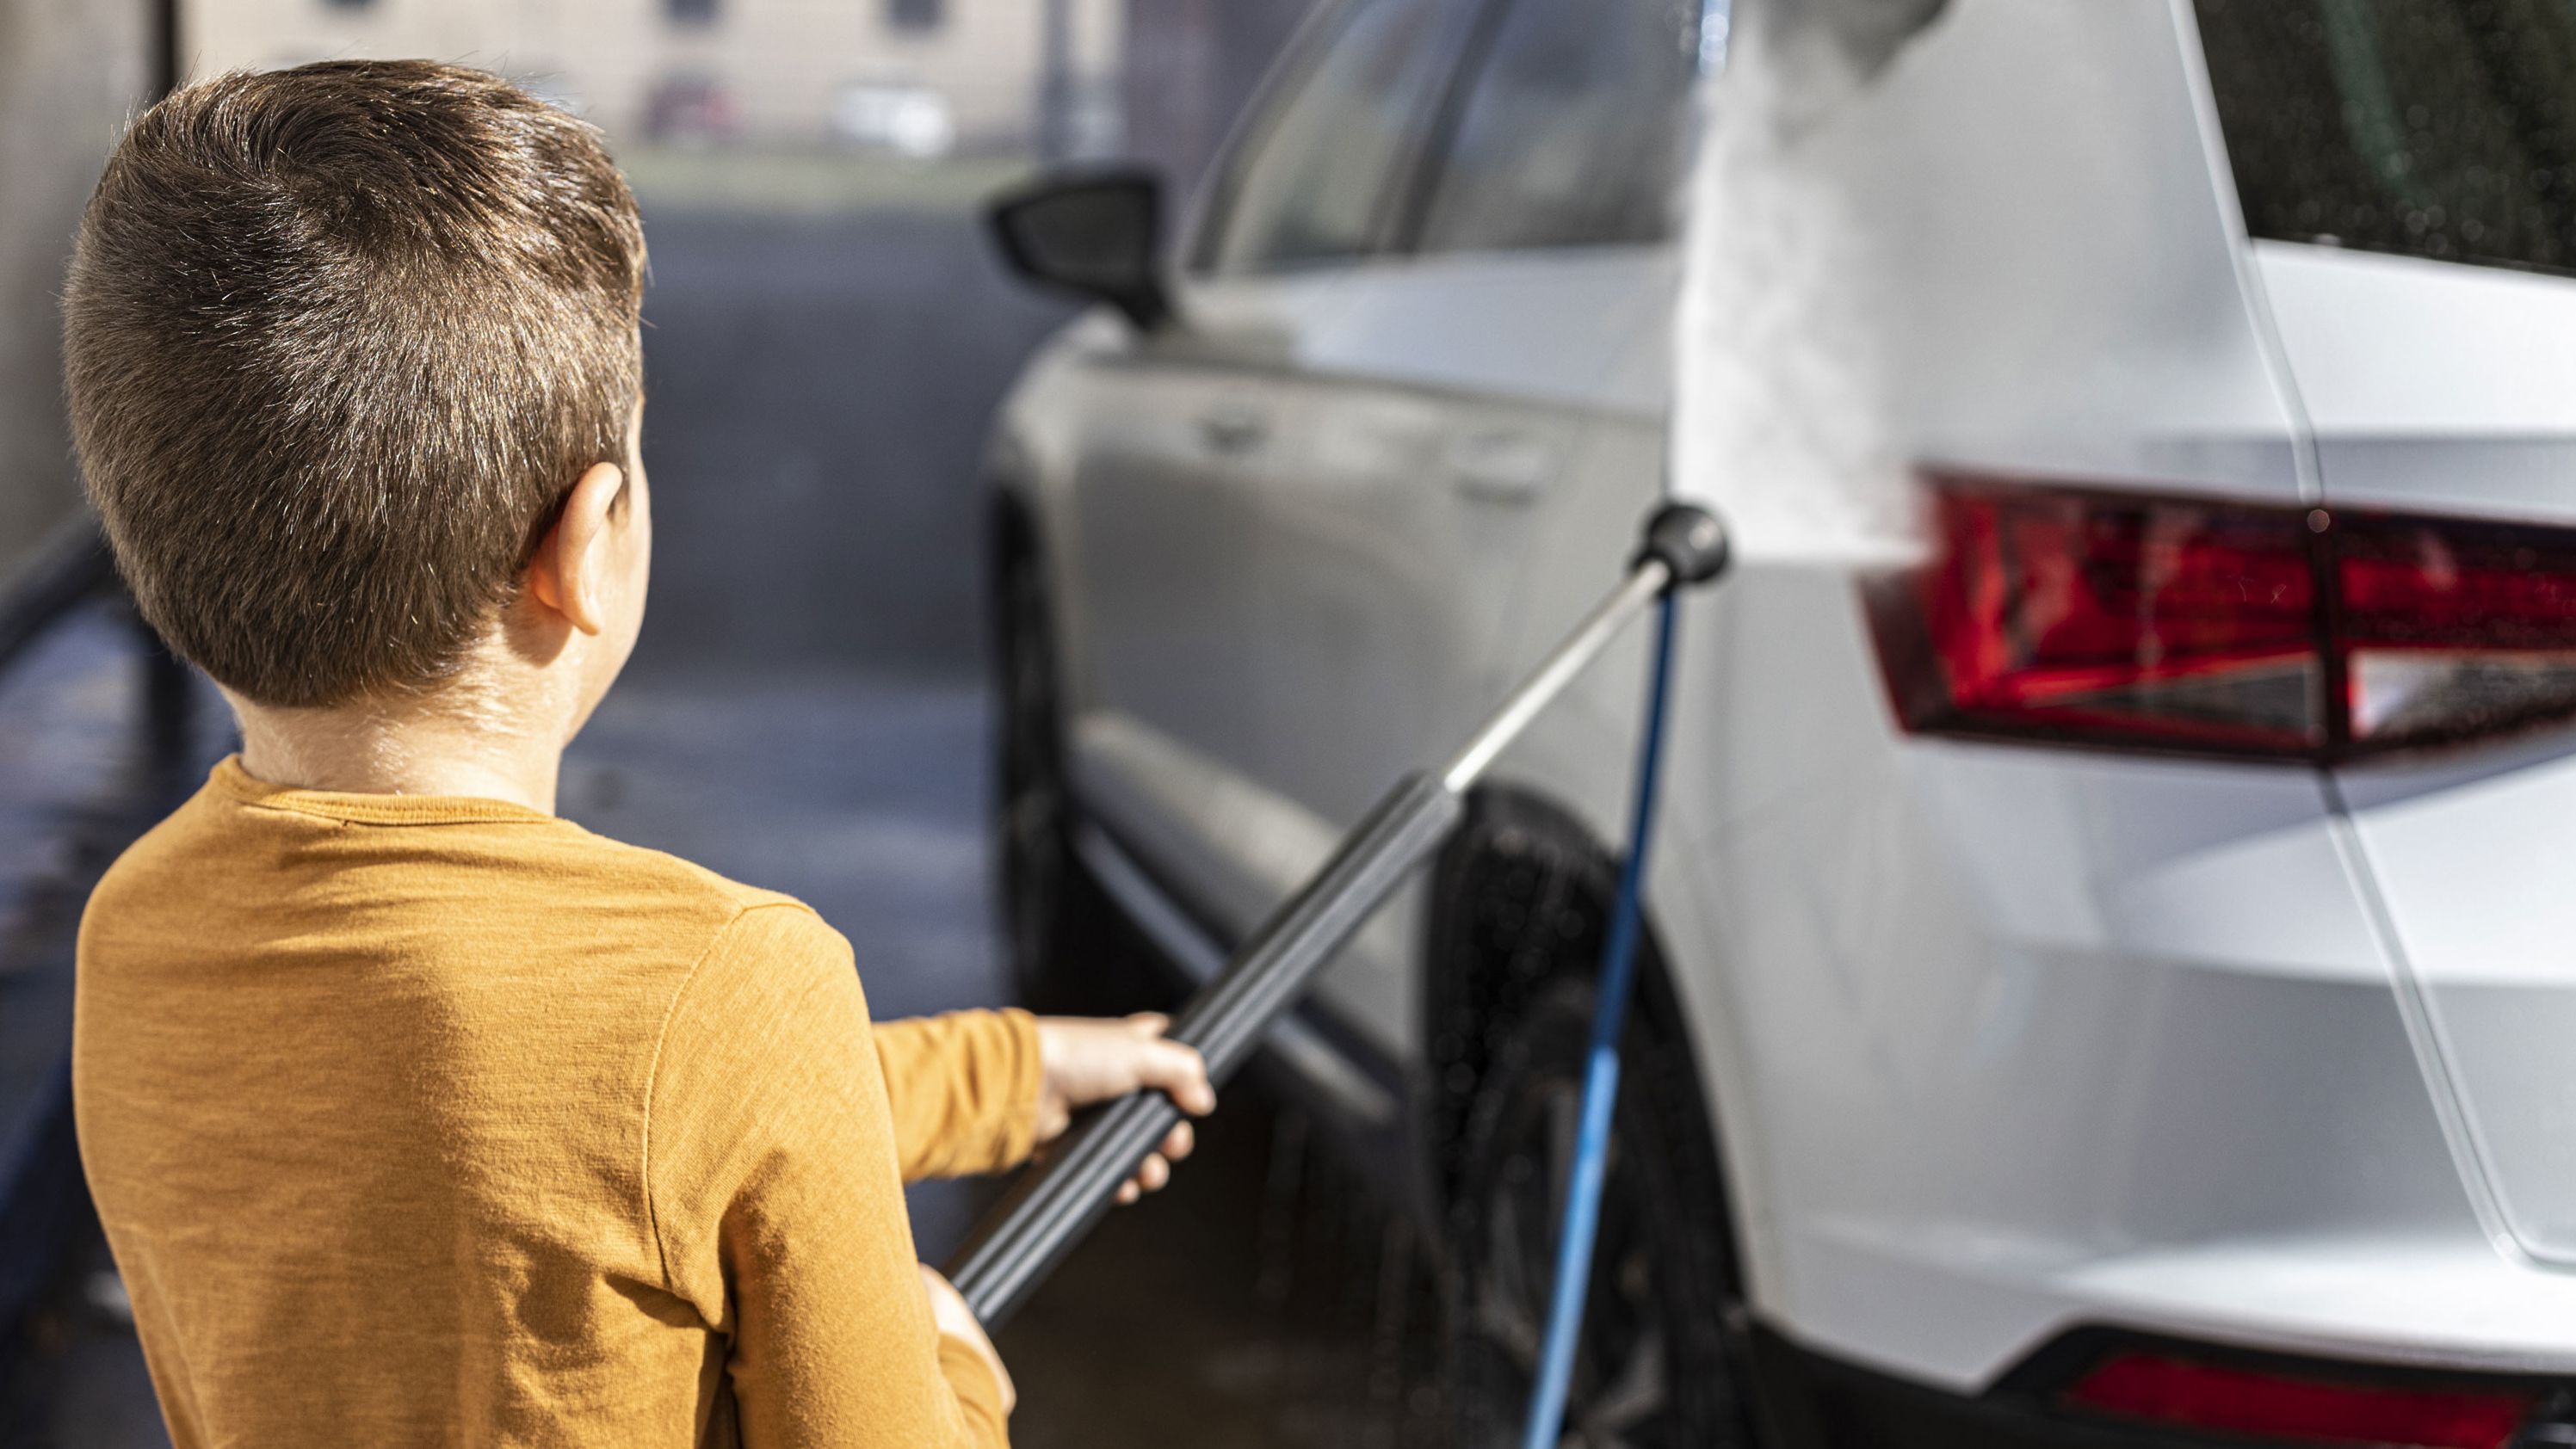 Do your children know how to help maintain the family vehicle? It's an important skill they should know by the time they are adults, says Shannon Carpenter.